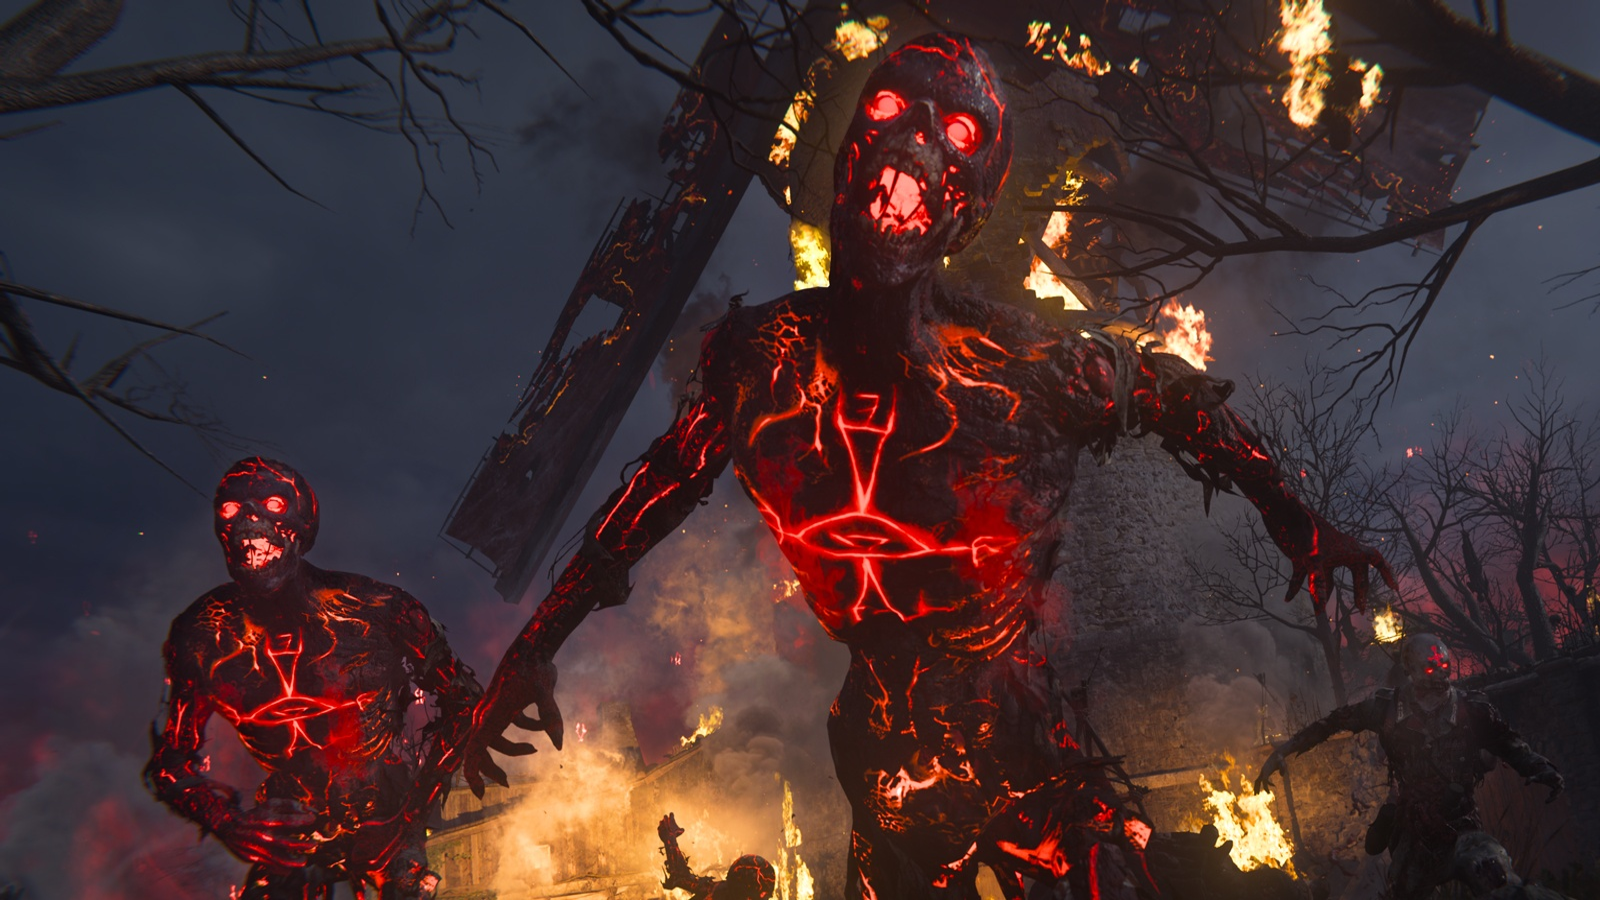 Call of Duty: Vanguard Zombies reveal trailer shows off demonic enemy and  weapons - Charlie INTEL